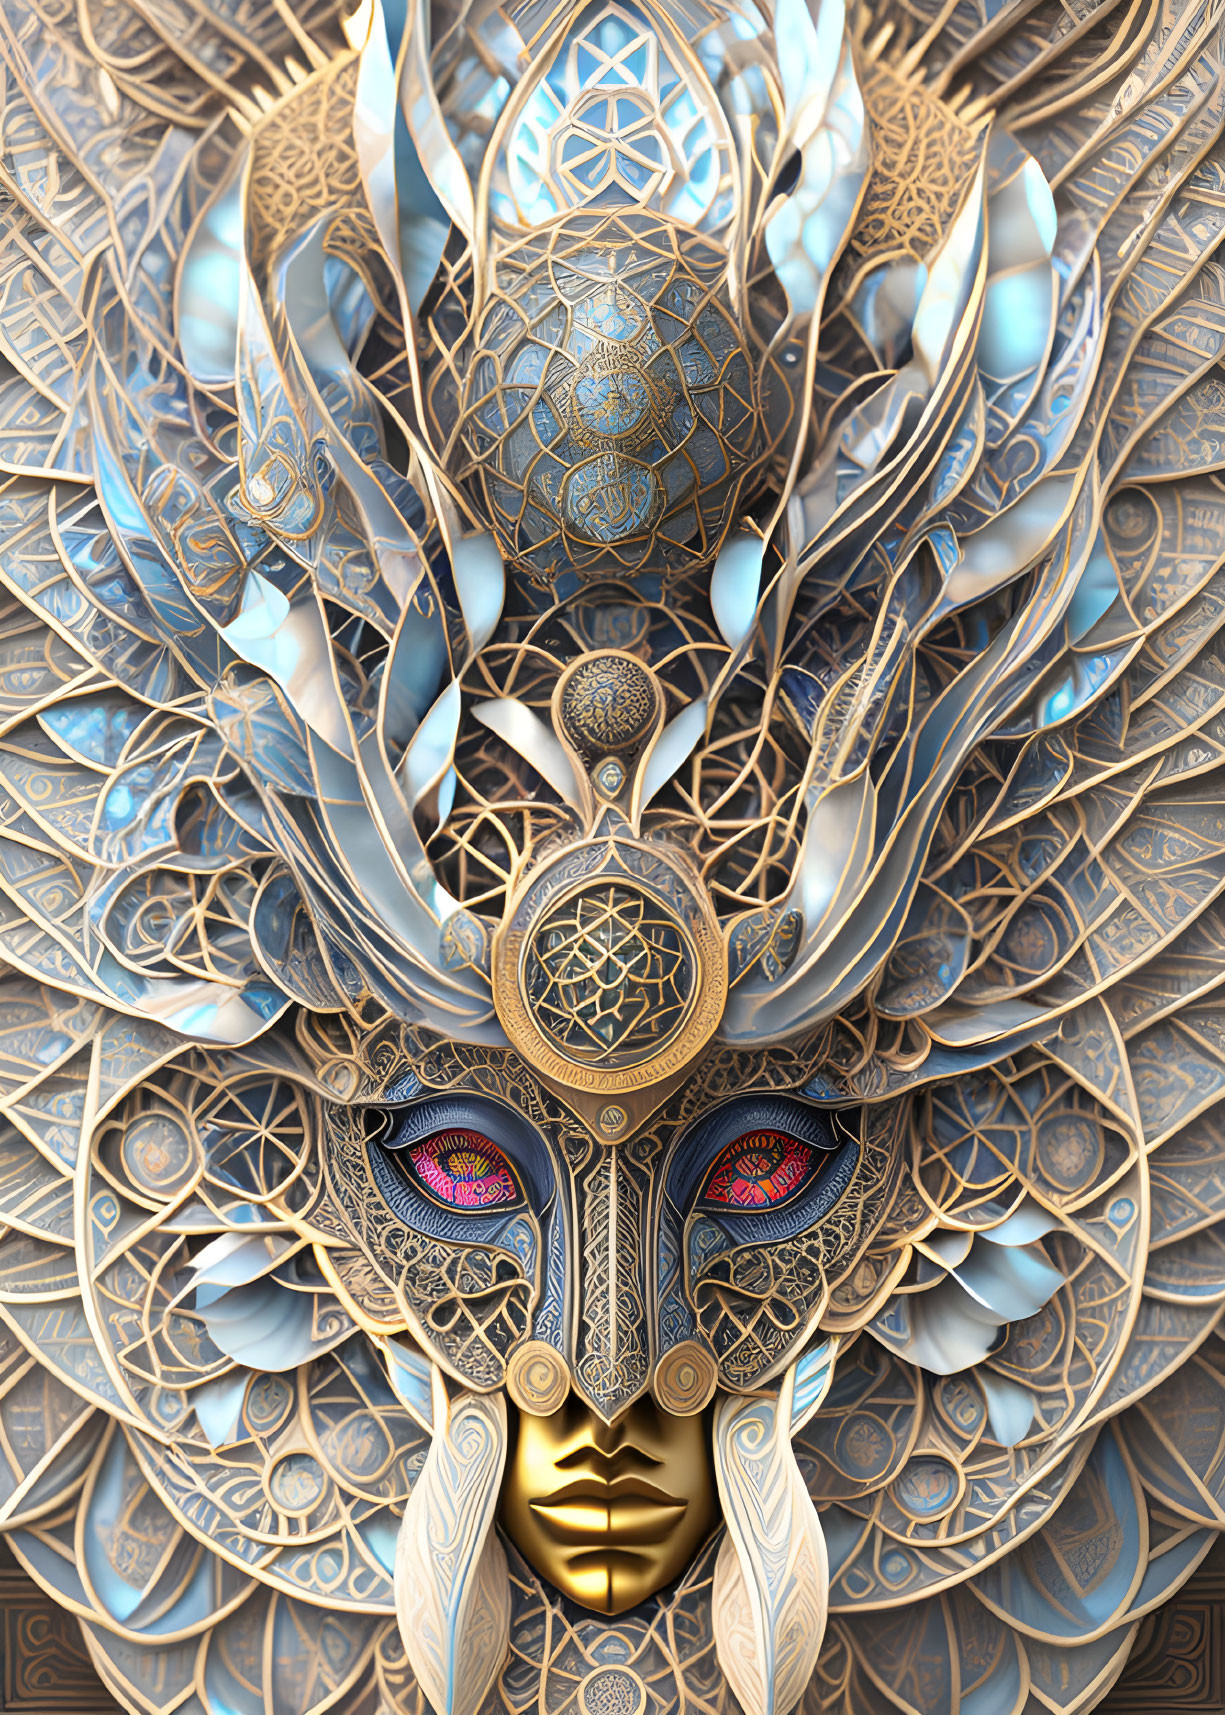 Symmetrical golden mask with blue feathers on intricate digital artwork